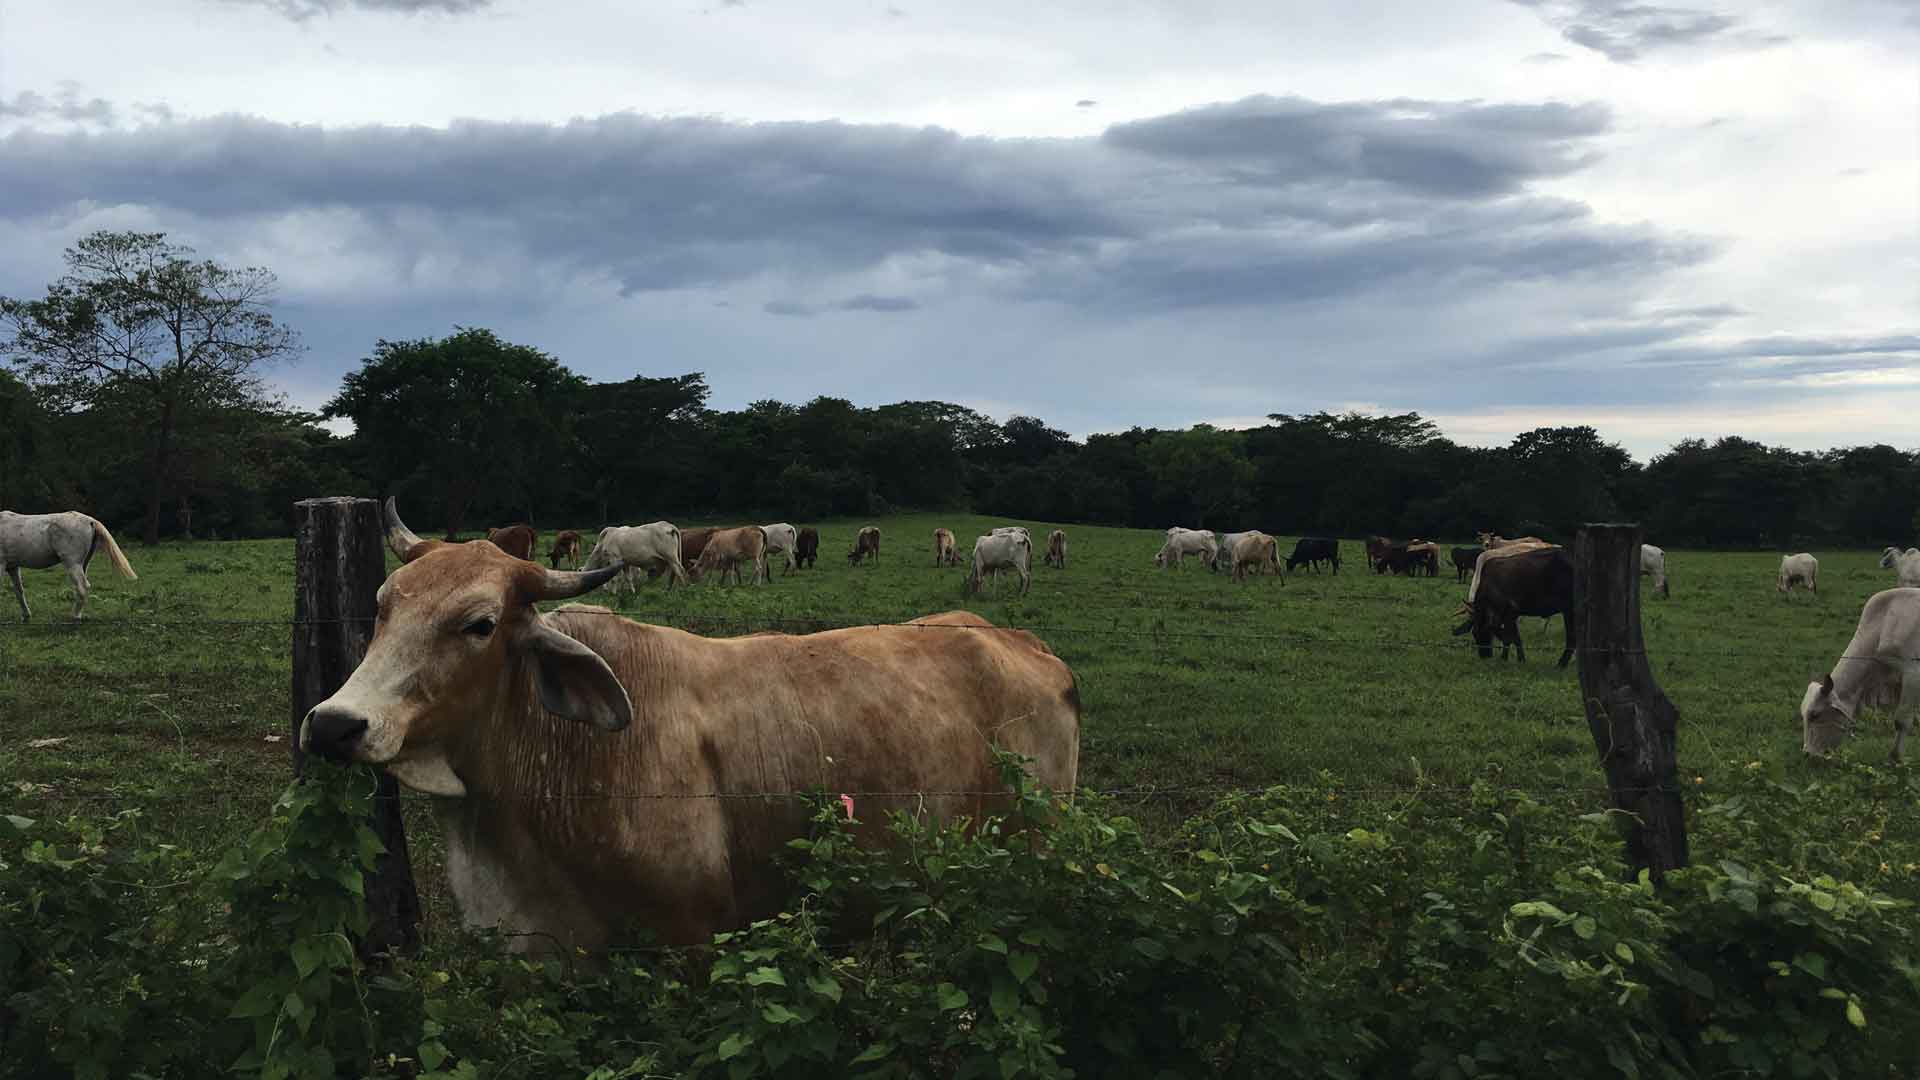 A tan cow eating a vine backdropped by a diverse herd of cattle grazing under cloudy skies